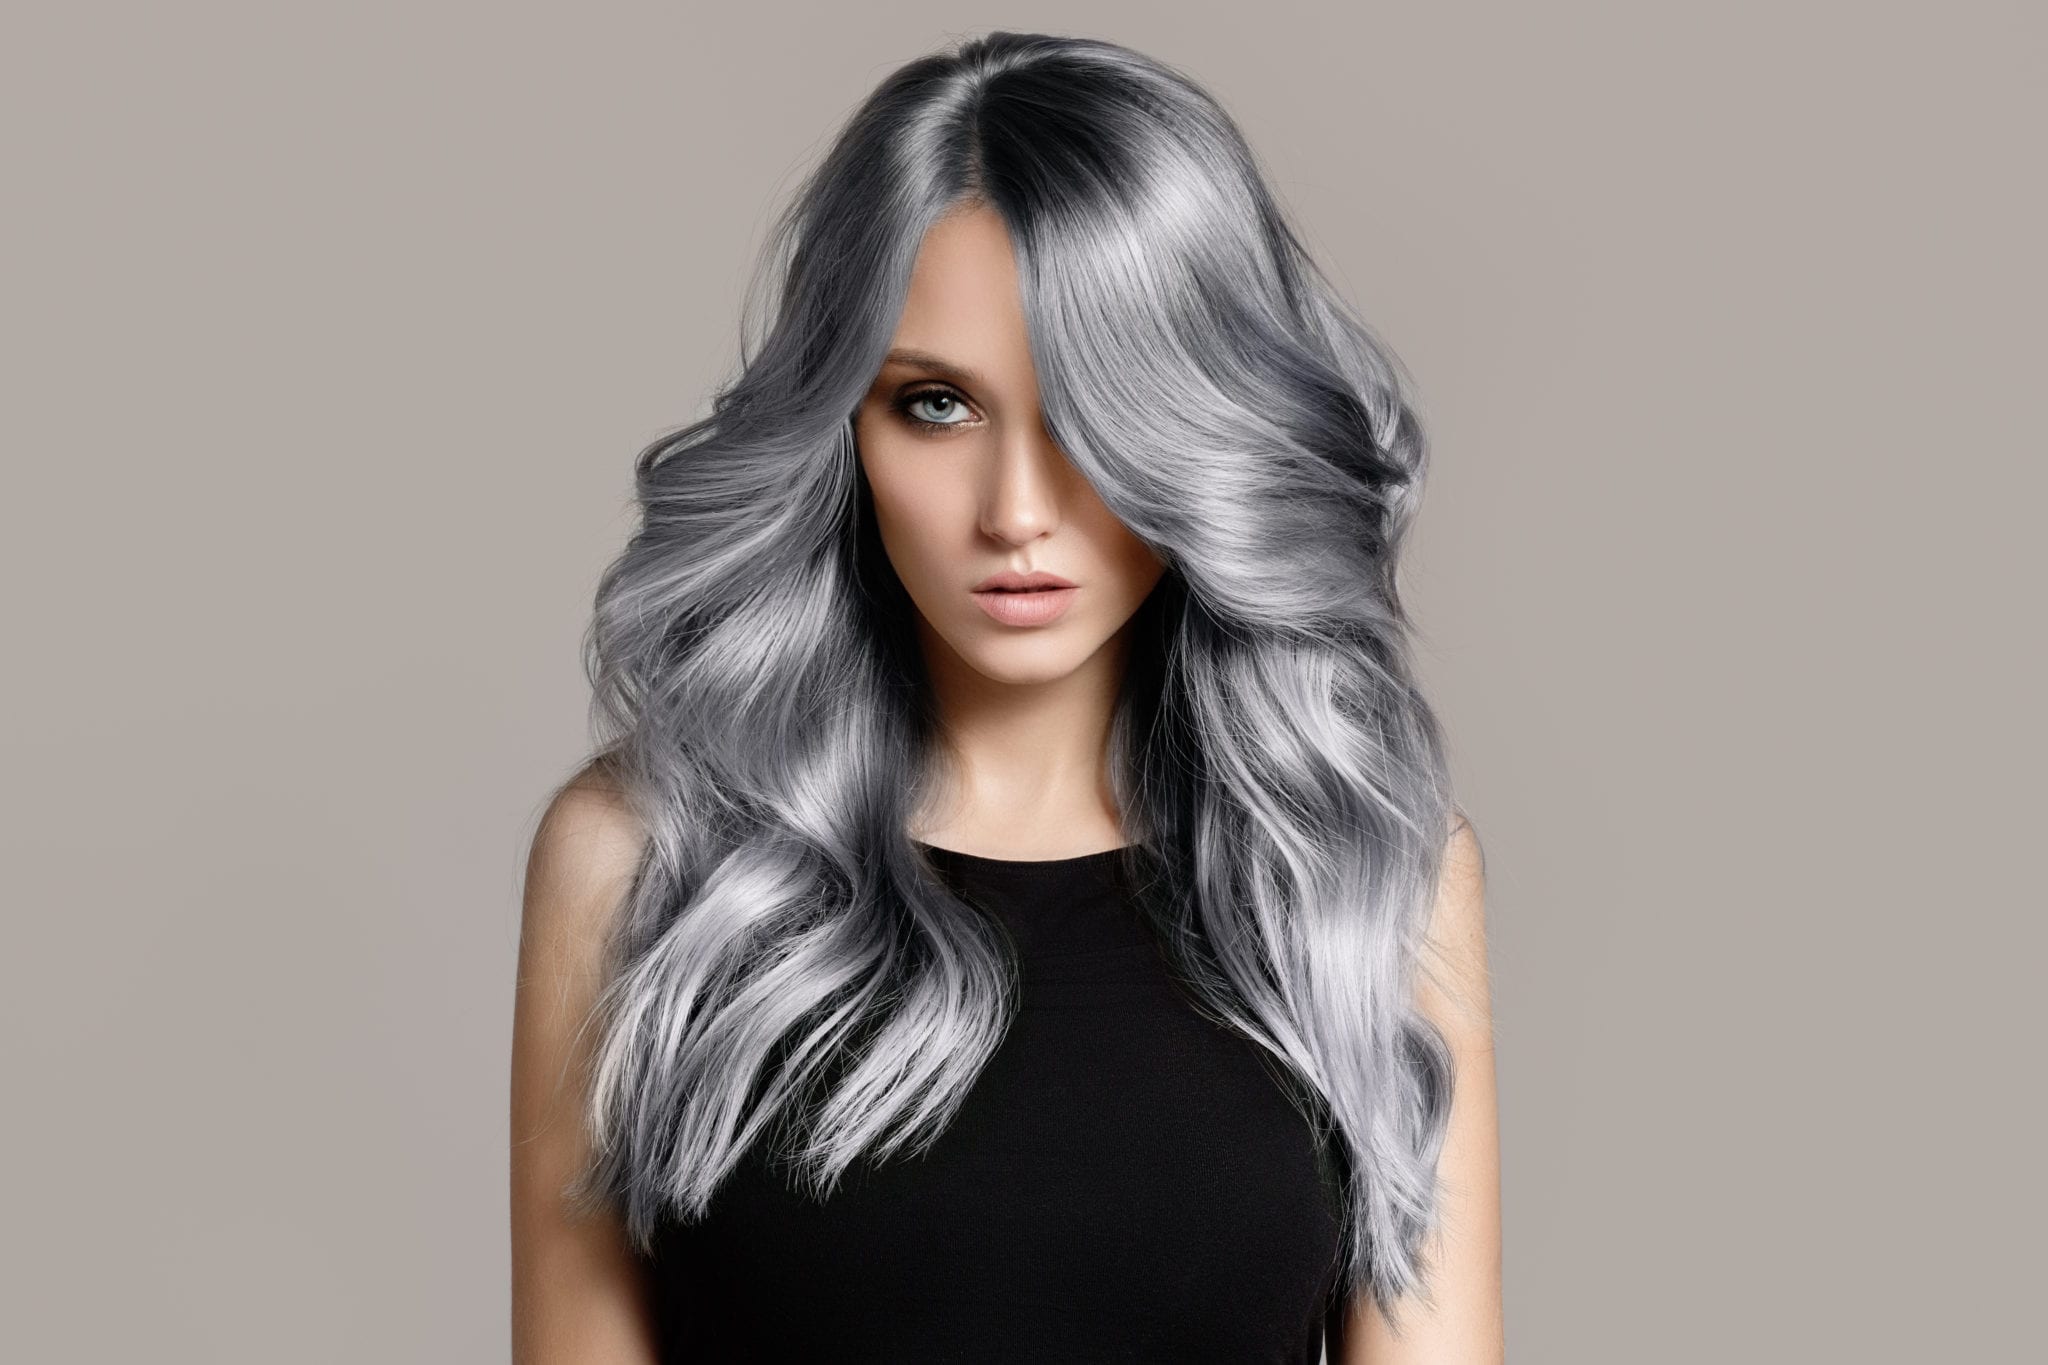 4 Bes
t Professional Hair Color To Cover Gray Organic